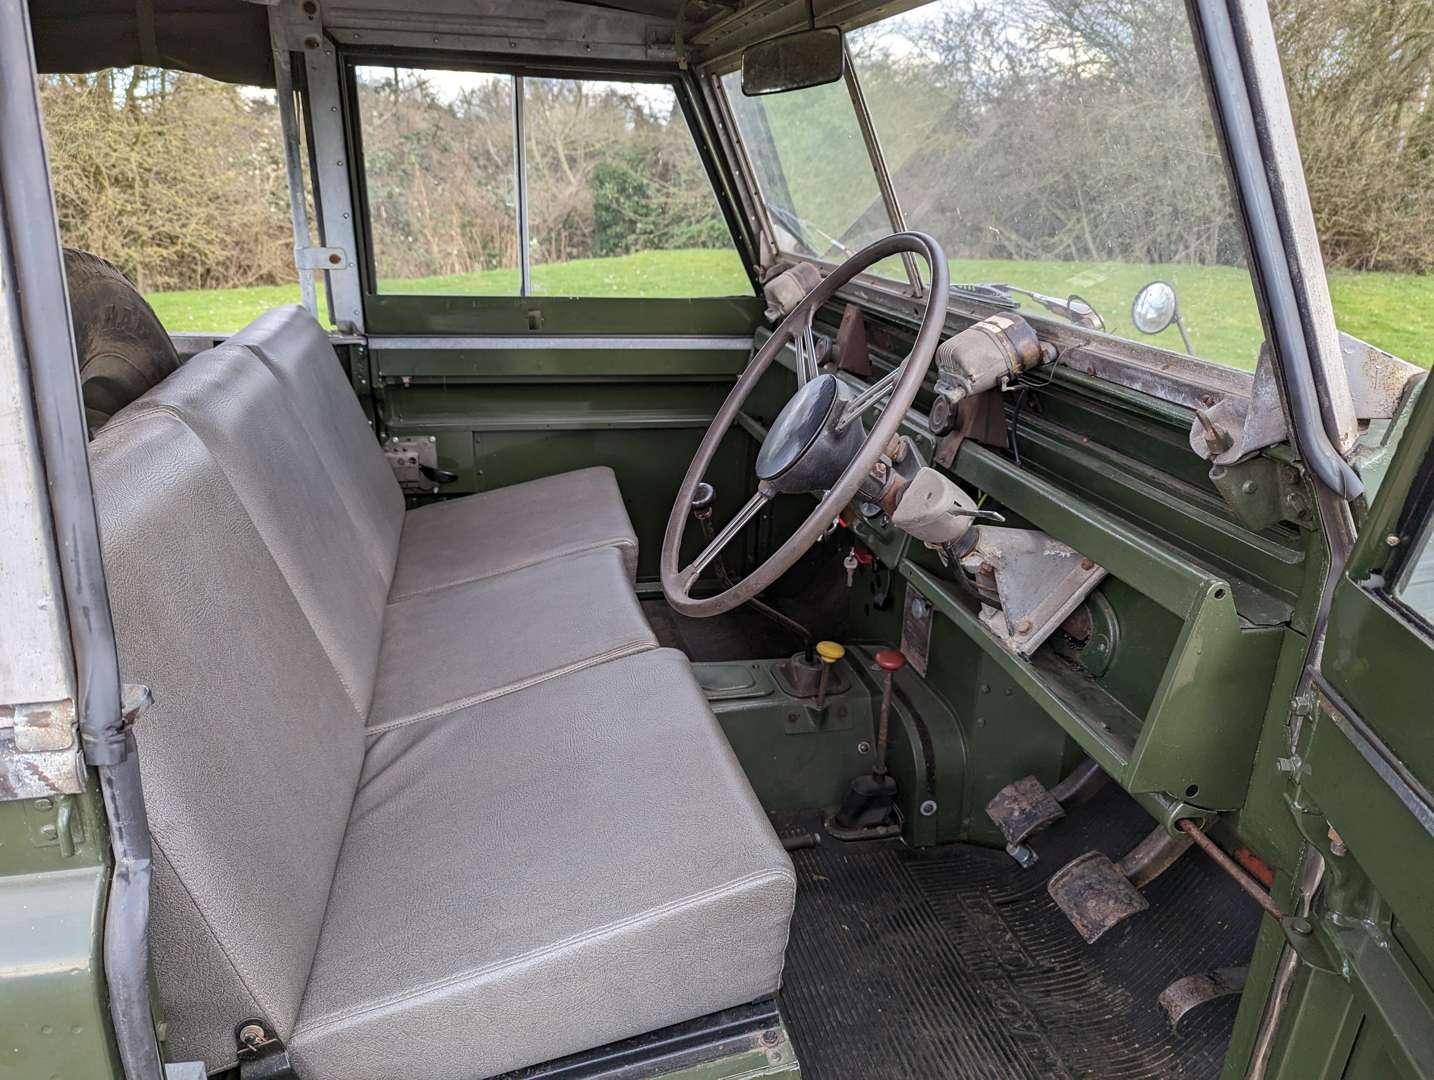 1958 LAND ROVER SWB SERIES II - Image 18 of 26